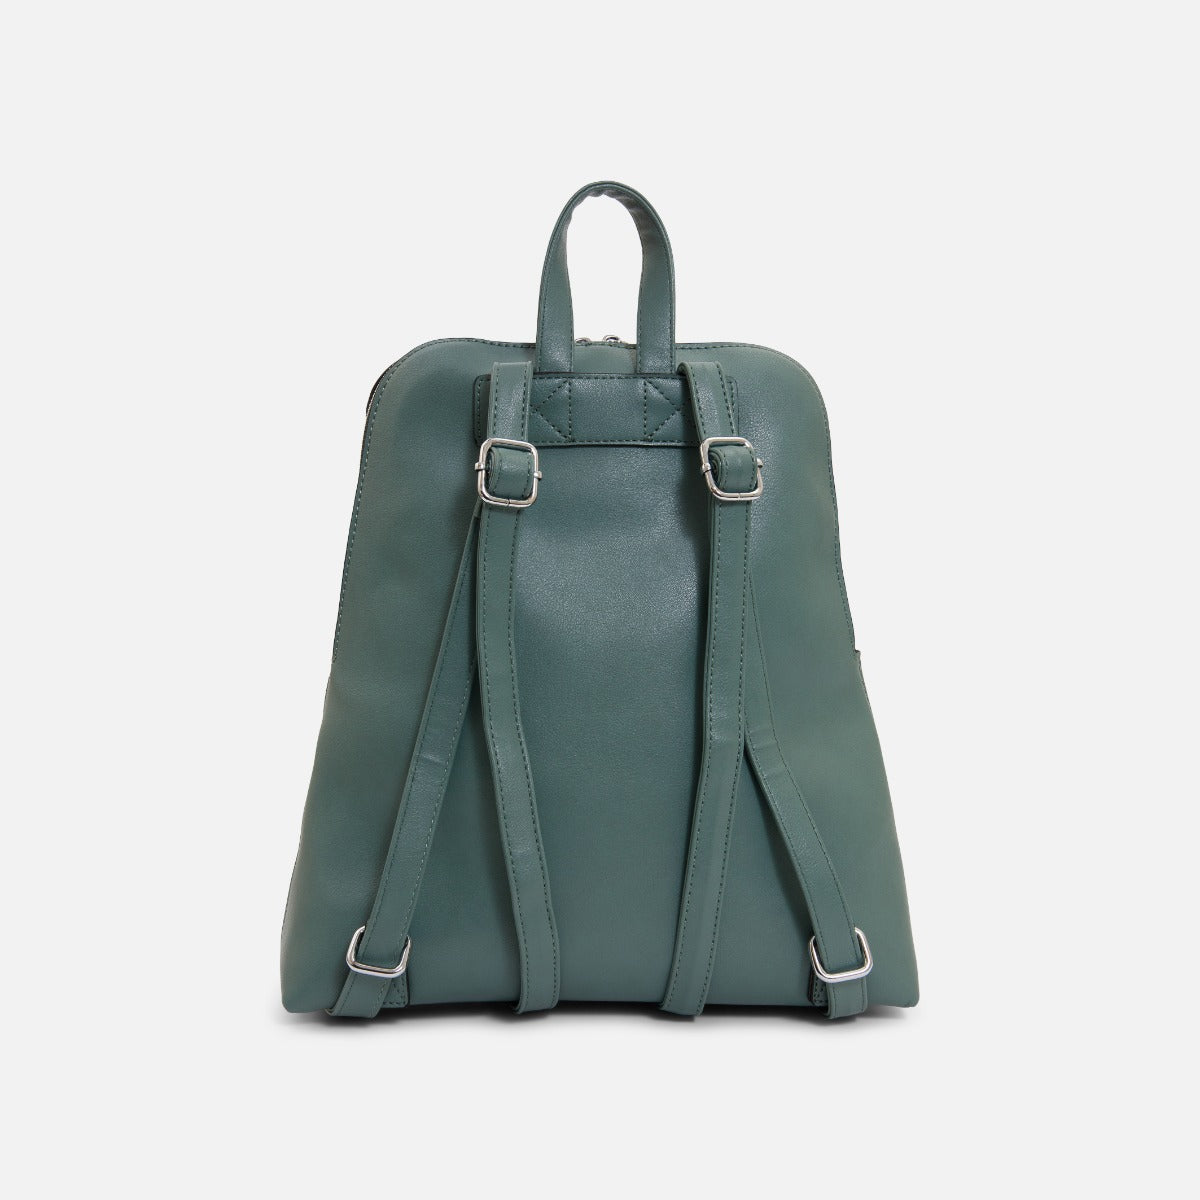 Green trapeze backpack with silver details